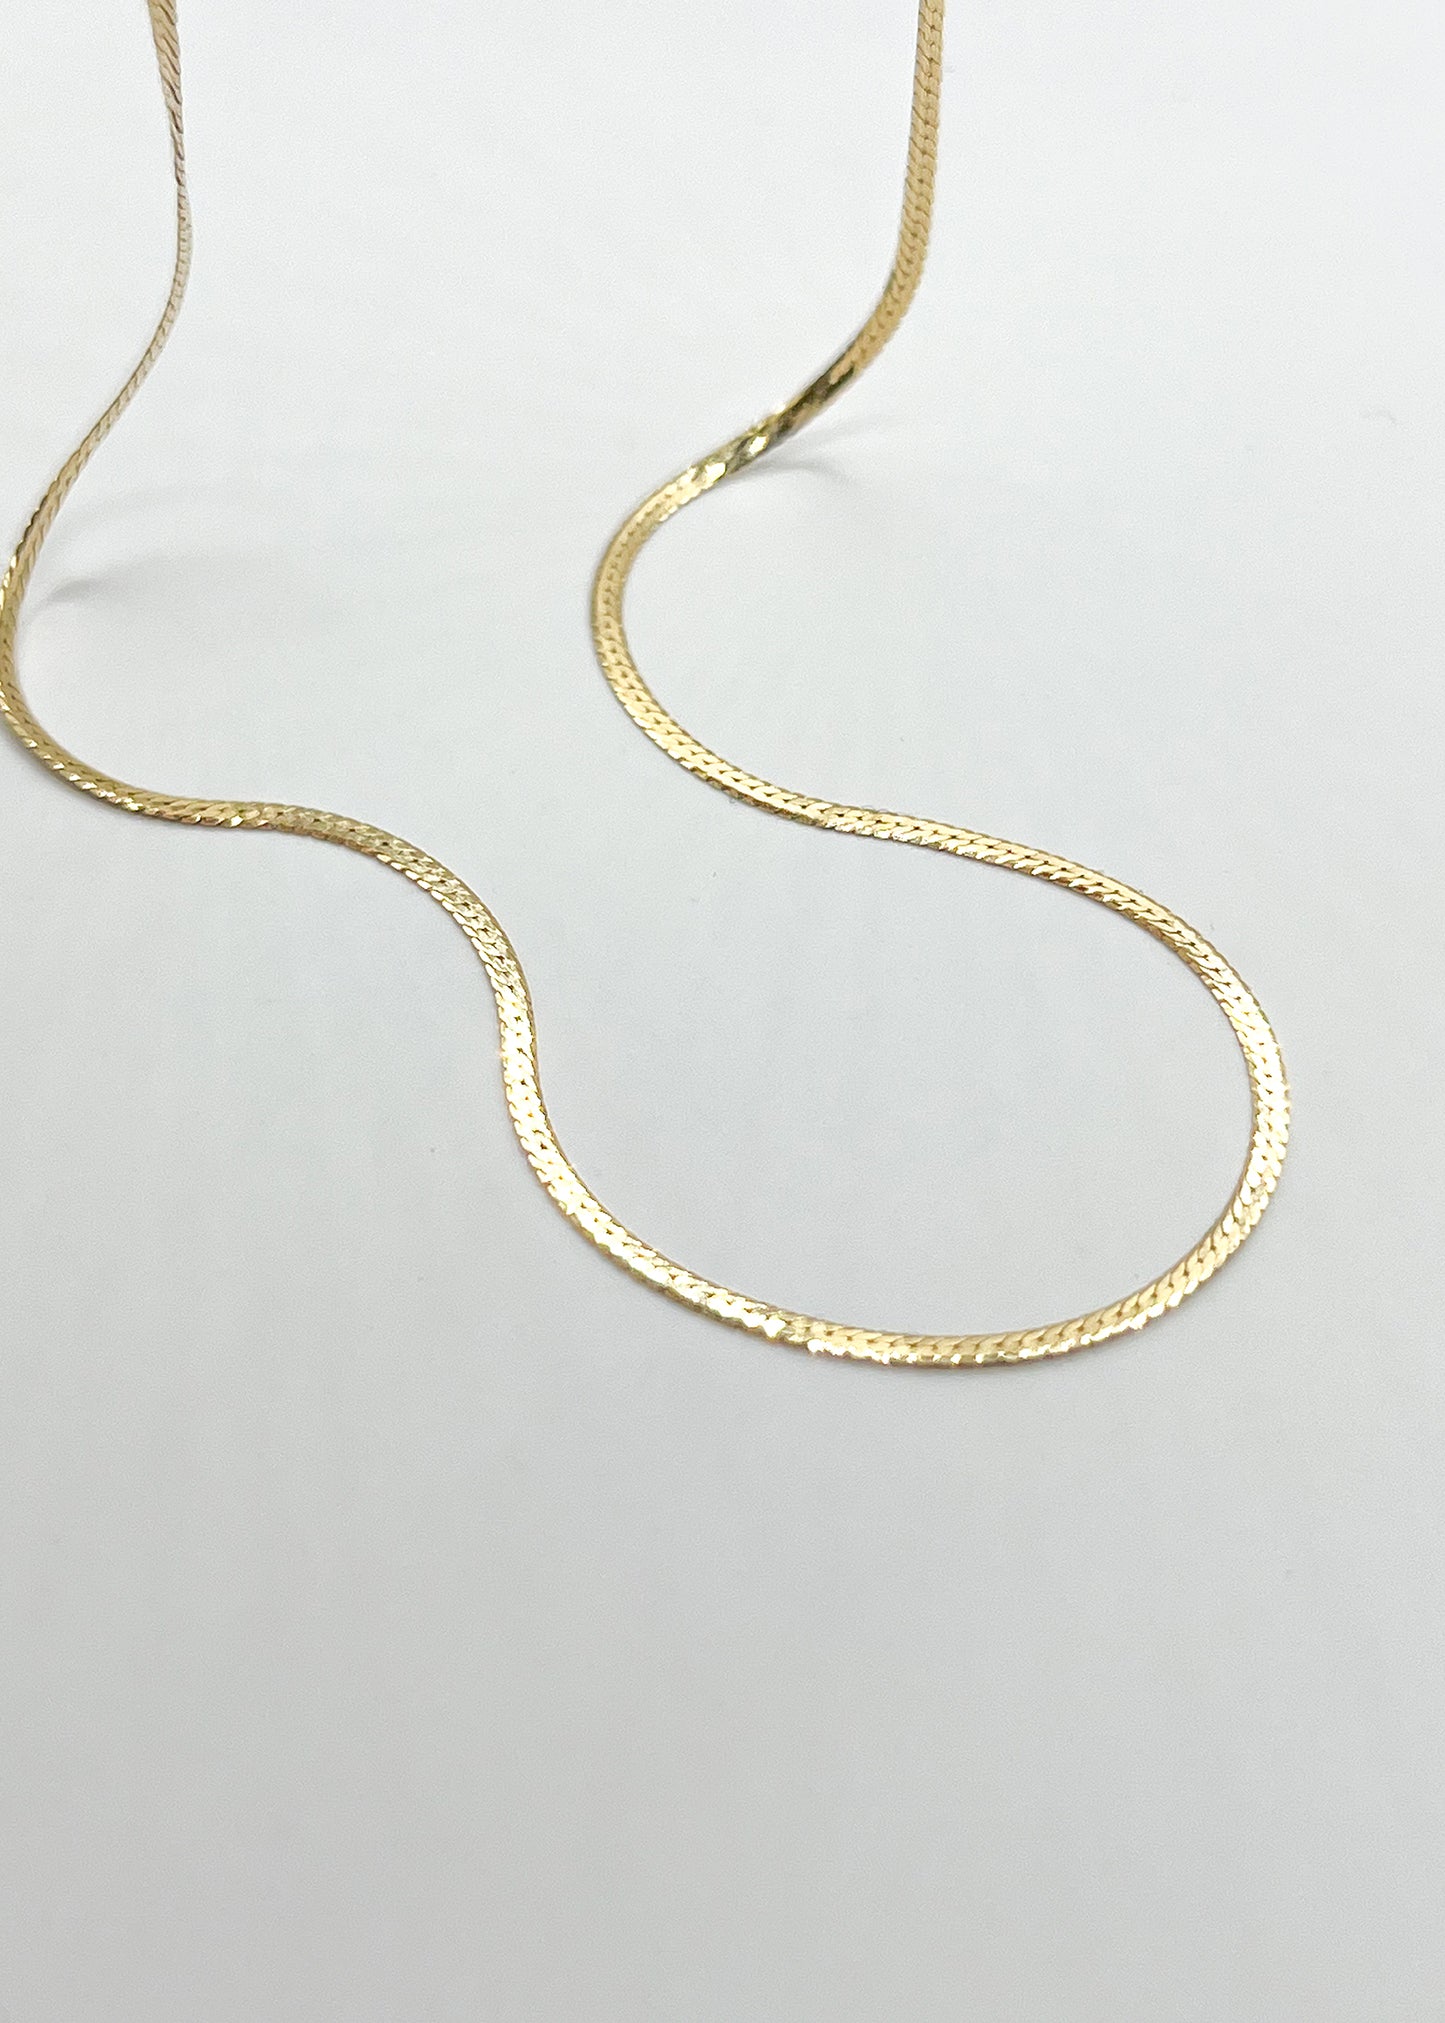 BEVERLY 18K SOLID GOLD NECKLACE